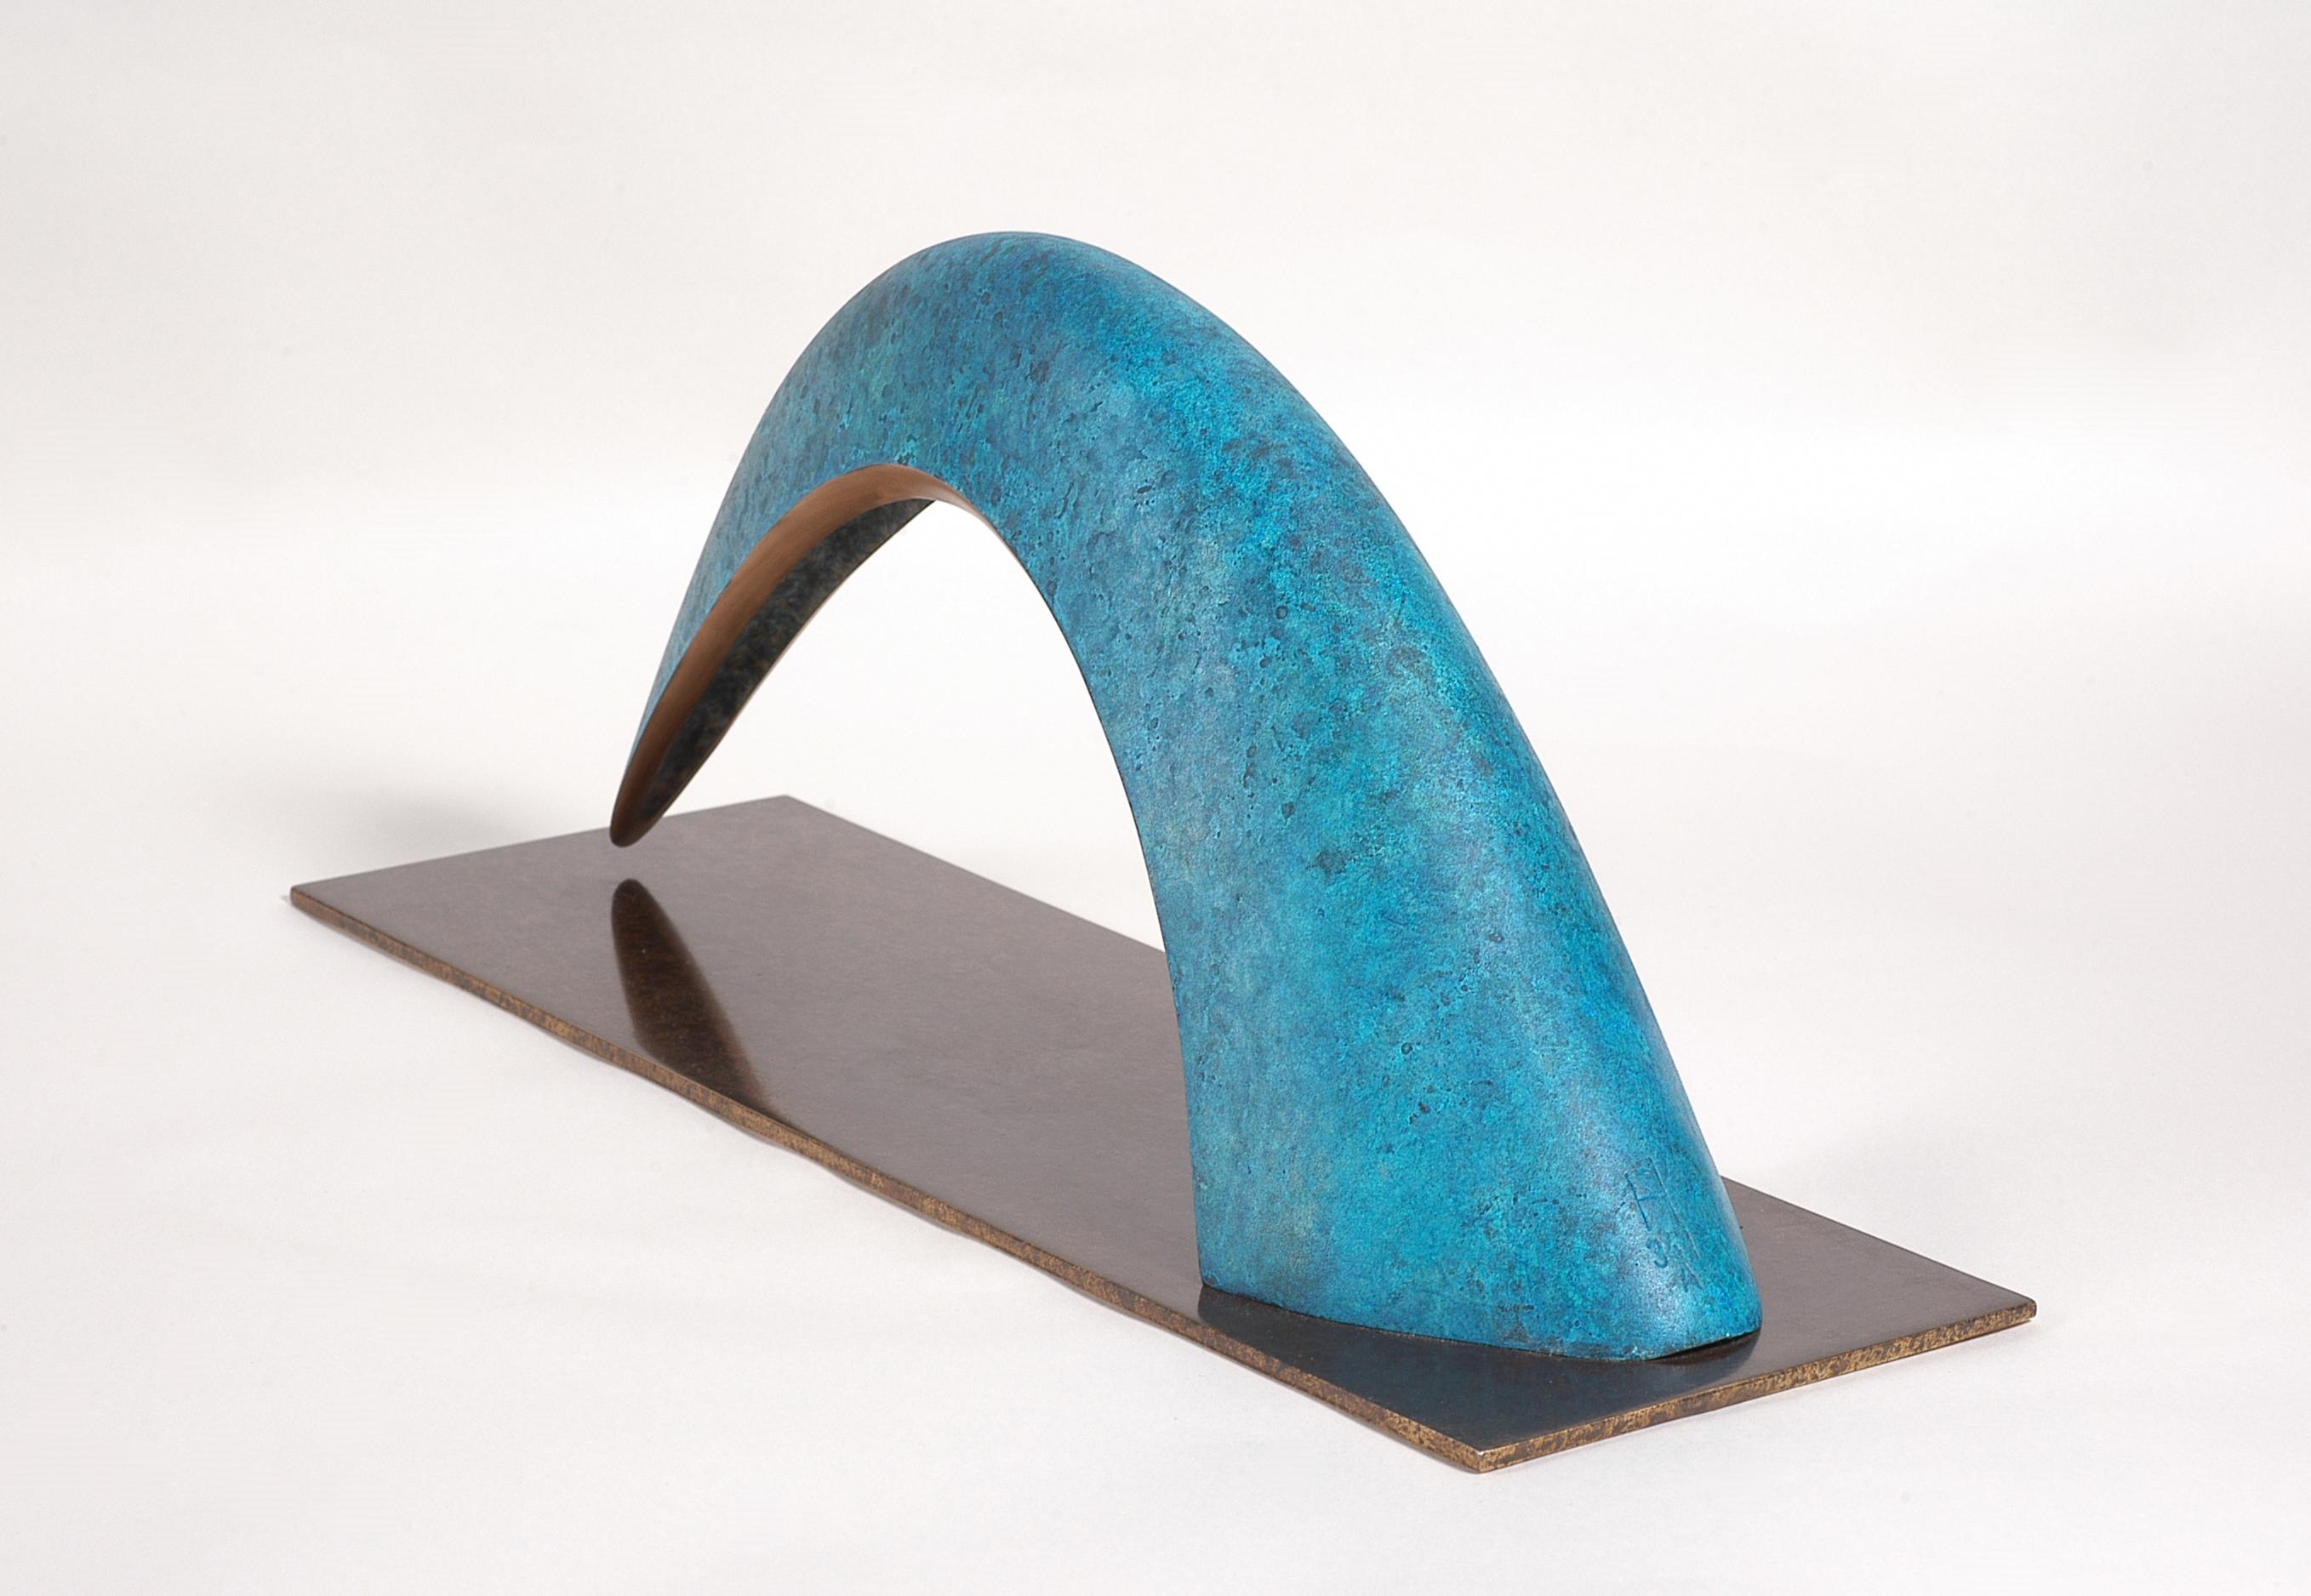 British Contemporary Sculpture by Philip Hearsey - On the Move 1